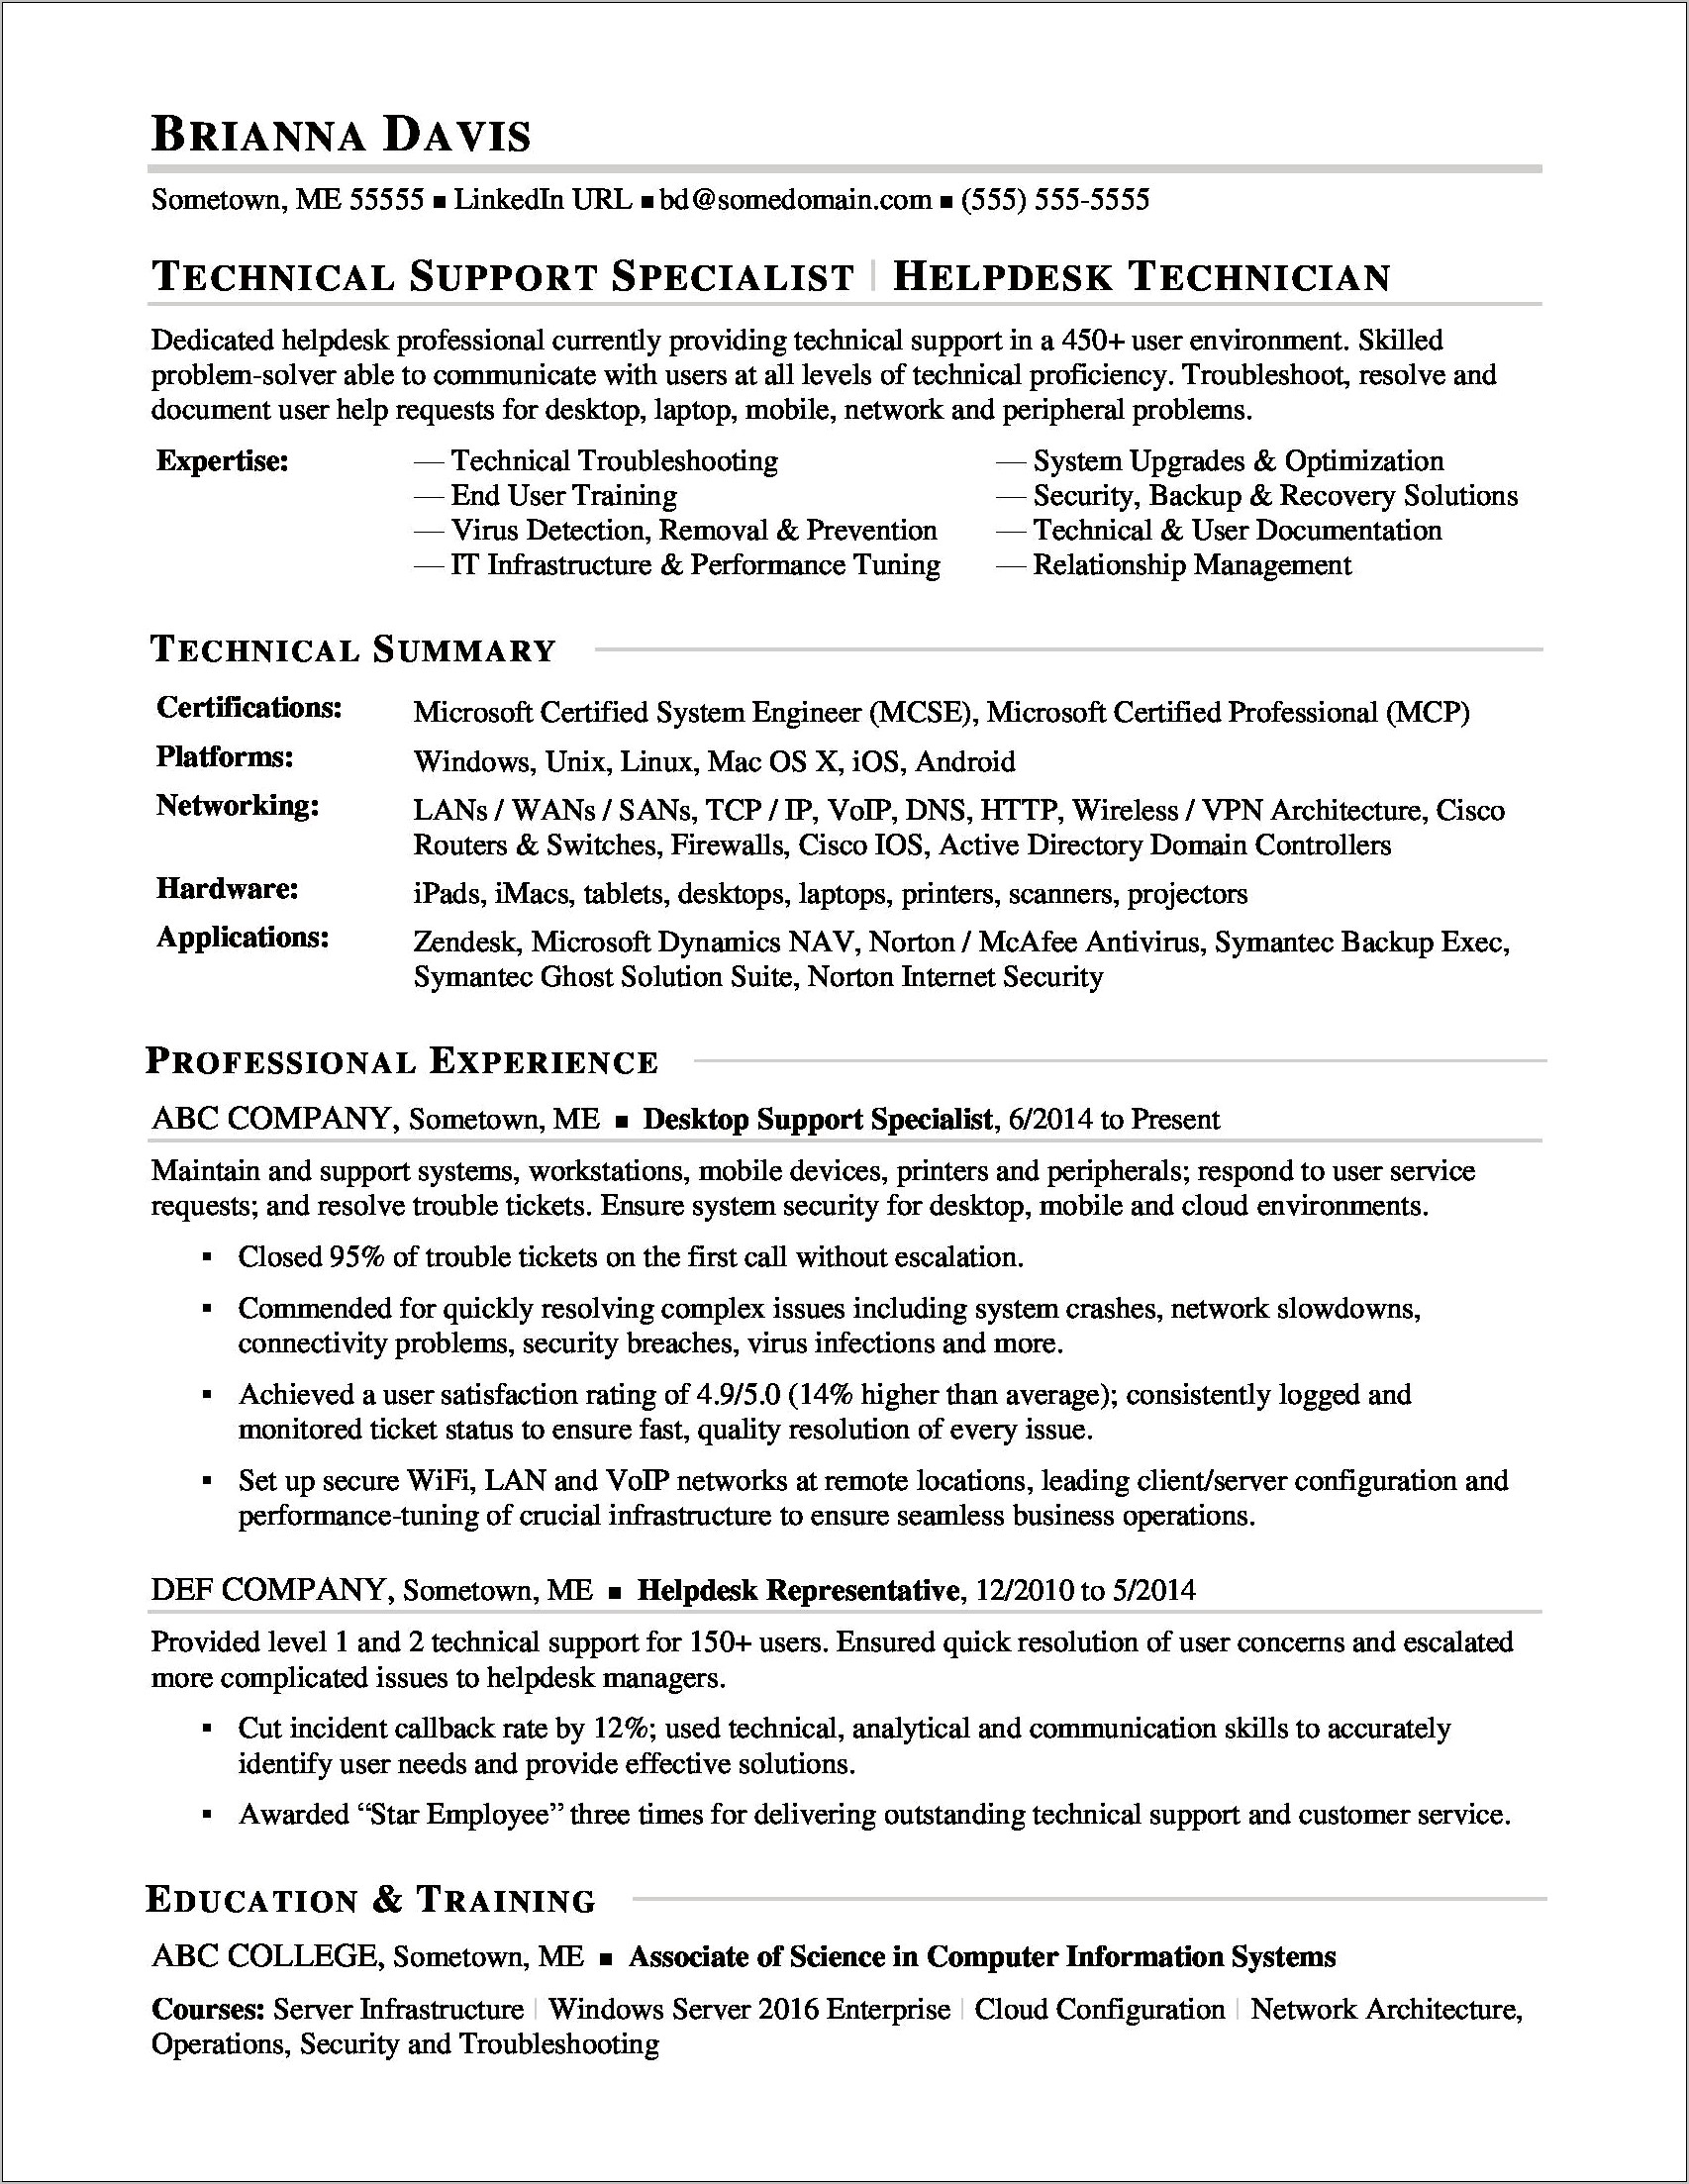 Putting Trouble Shooting Experience On Resume